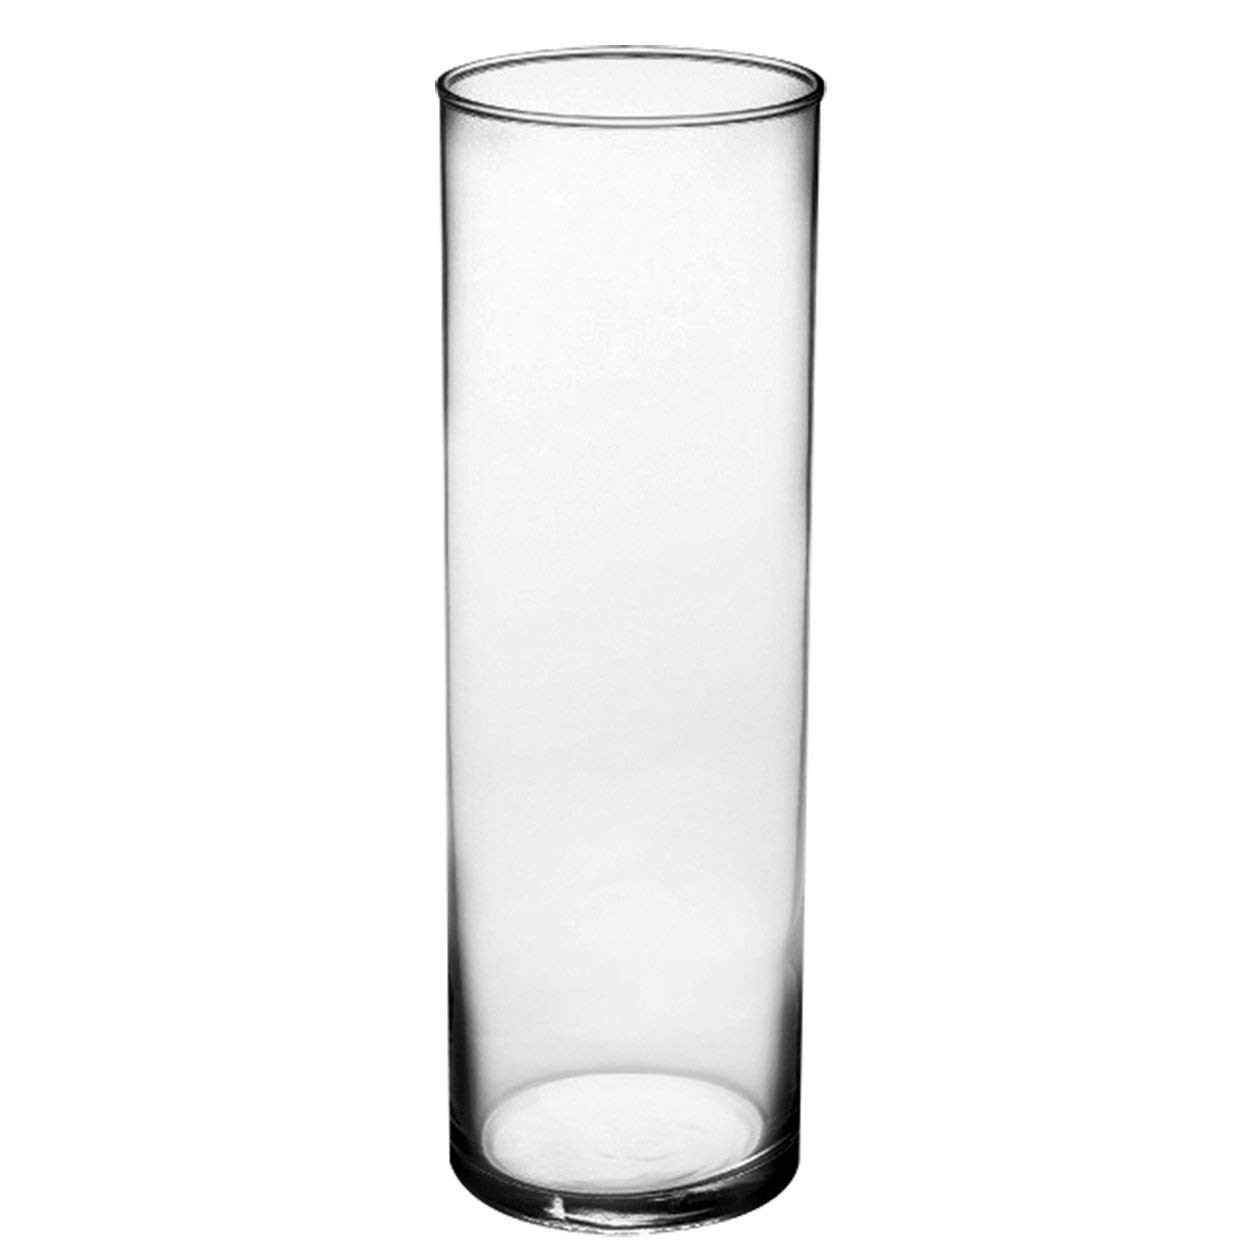 25 Unique 9 Inch Glass Vase 2024 free download 9 inch glass vase of amazon com syndicate sales 3 1 2 x 10 1 2 cylinder vase clear throughout amazon com syndicate sales 3 1 2 x 10 1 2 cylinder vase clear planters garden outdoor